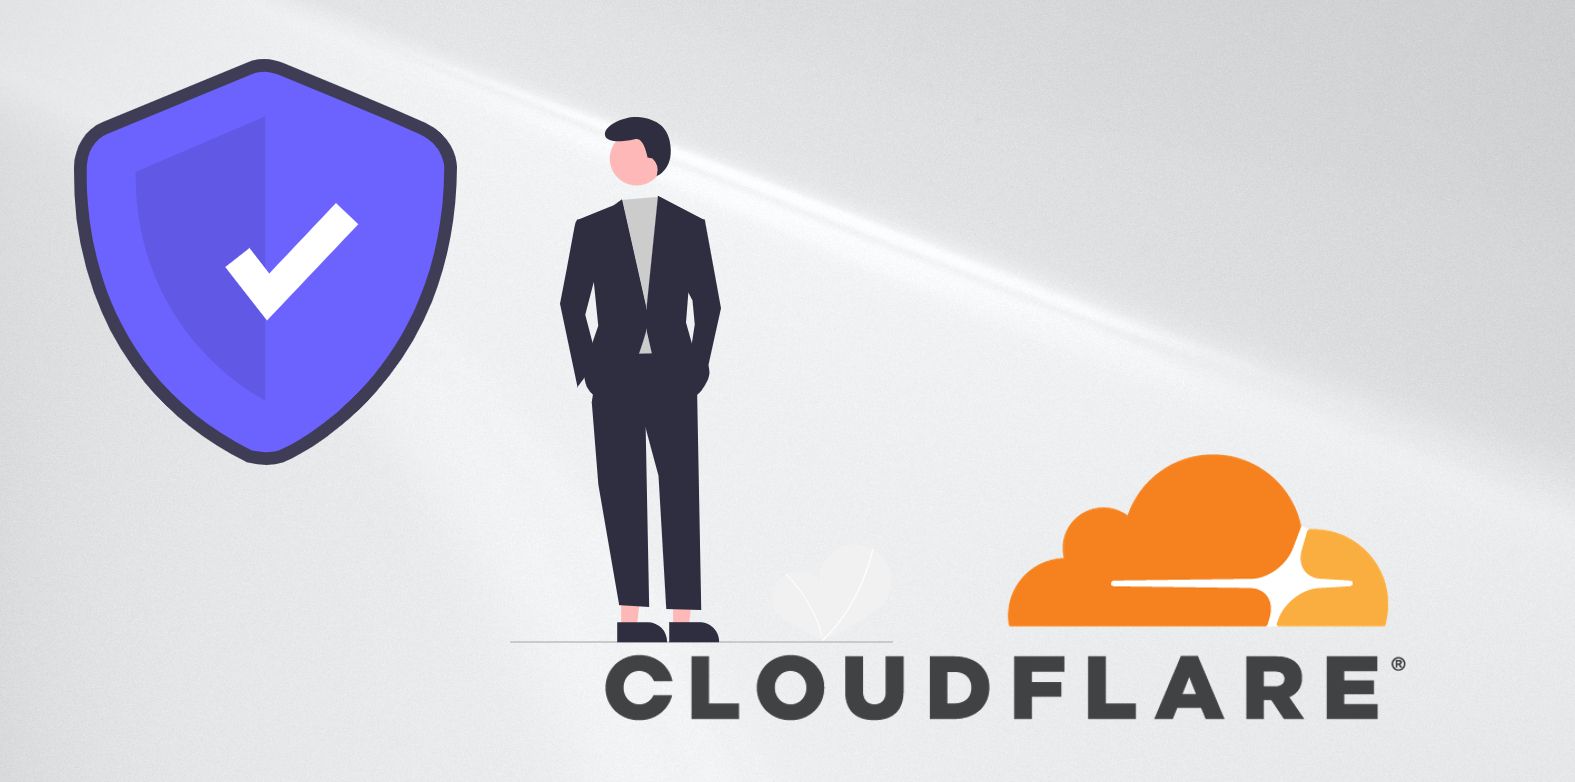 Using Cloudflare on your website? And if you do not want to purchase a Commercial SSL Certificate Authority or use a Free Let’s Encrypt SSL, you can install Cloudflare Origin Certificate on your hosting server to maintain End to End encryption without paying a dime.